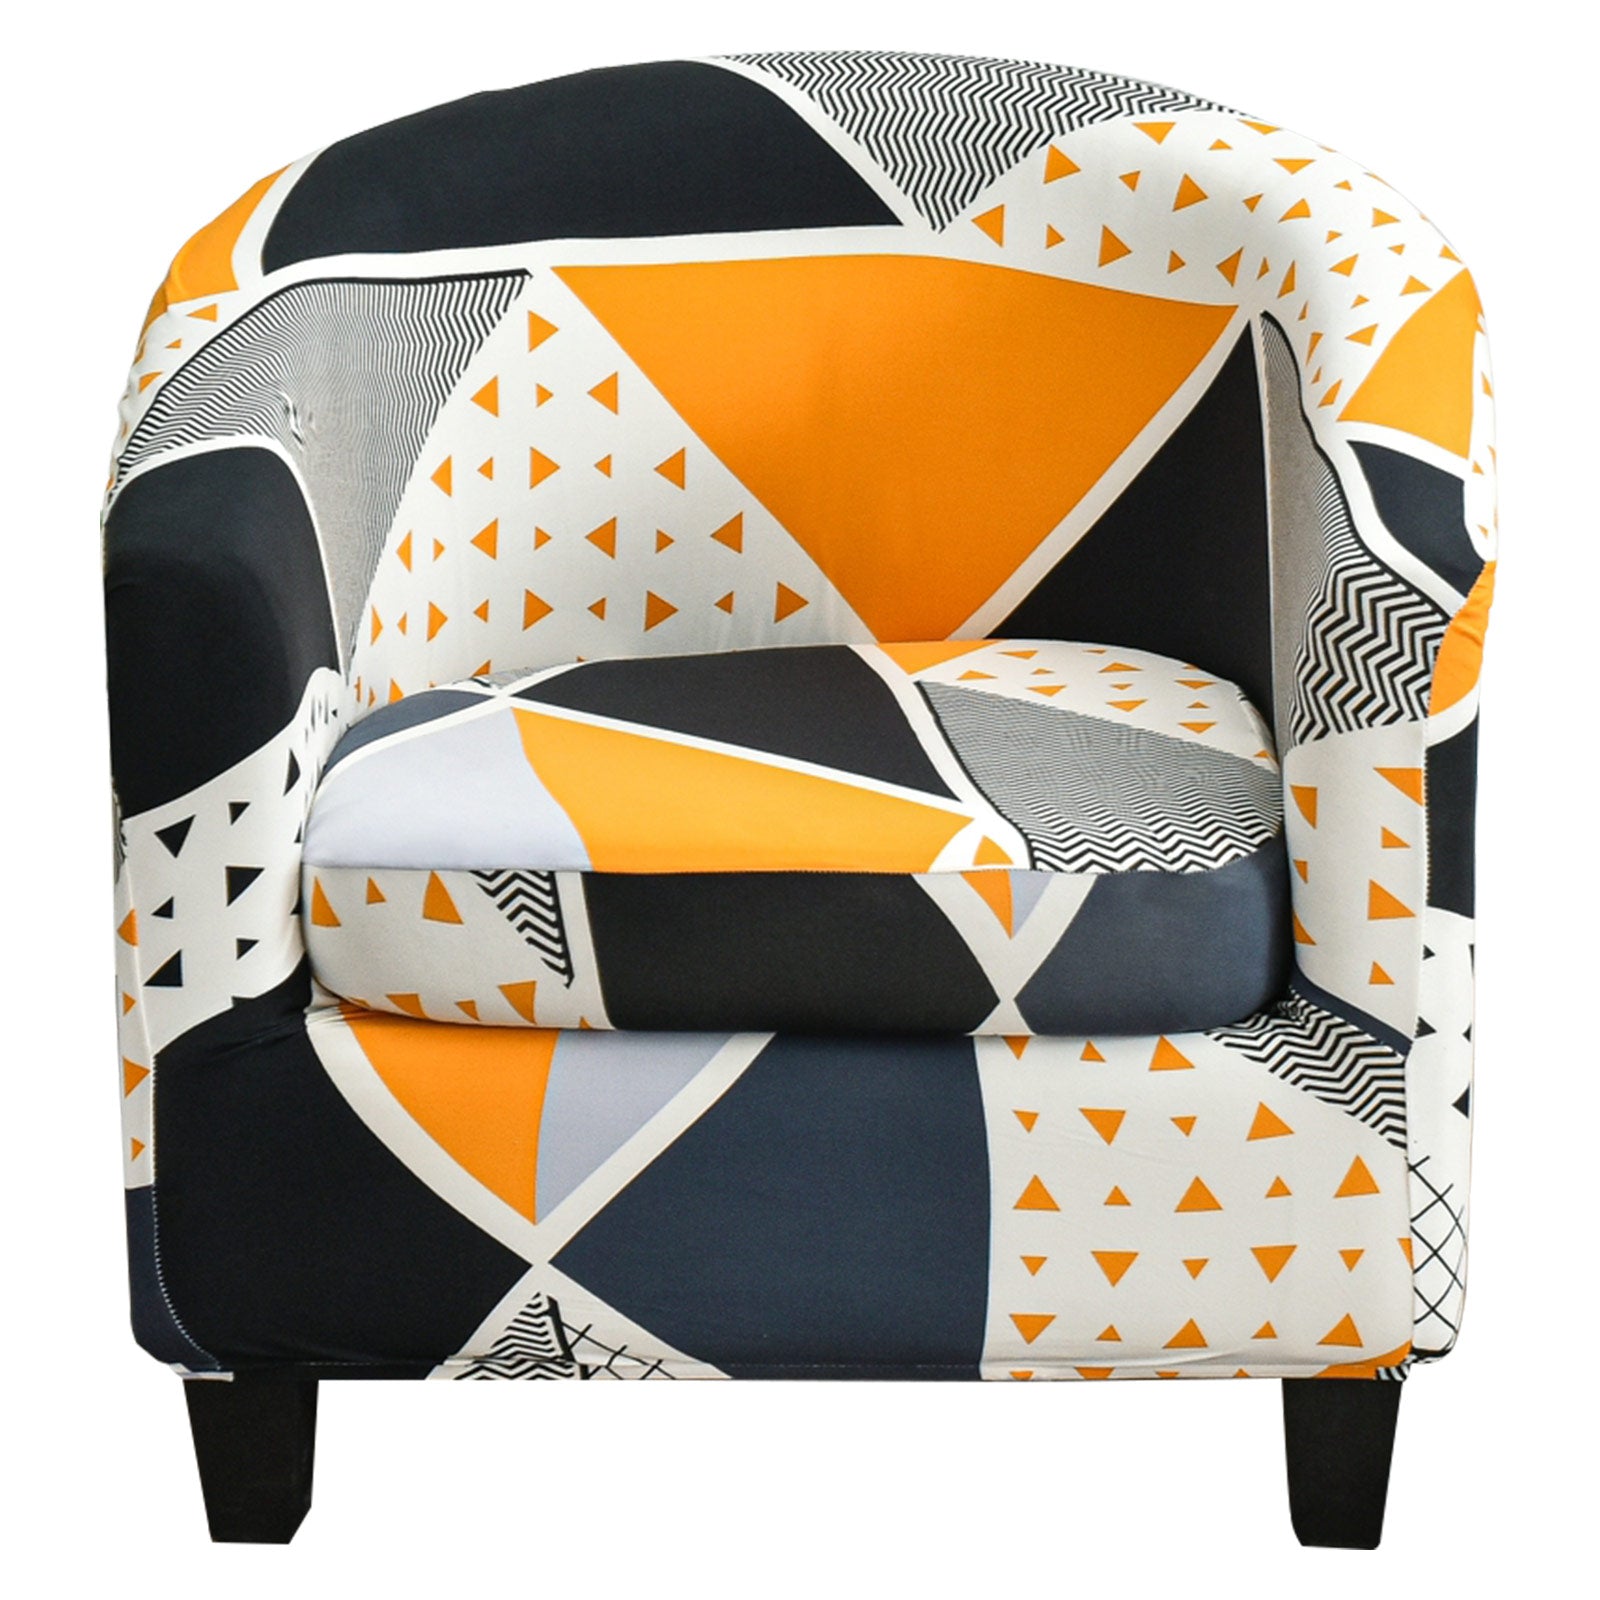 2 Pieces Stretch Couch Slipcover Printed Club Chair Slipcover Geometric Pattern Tub Chair Slipcover, 20 Style